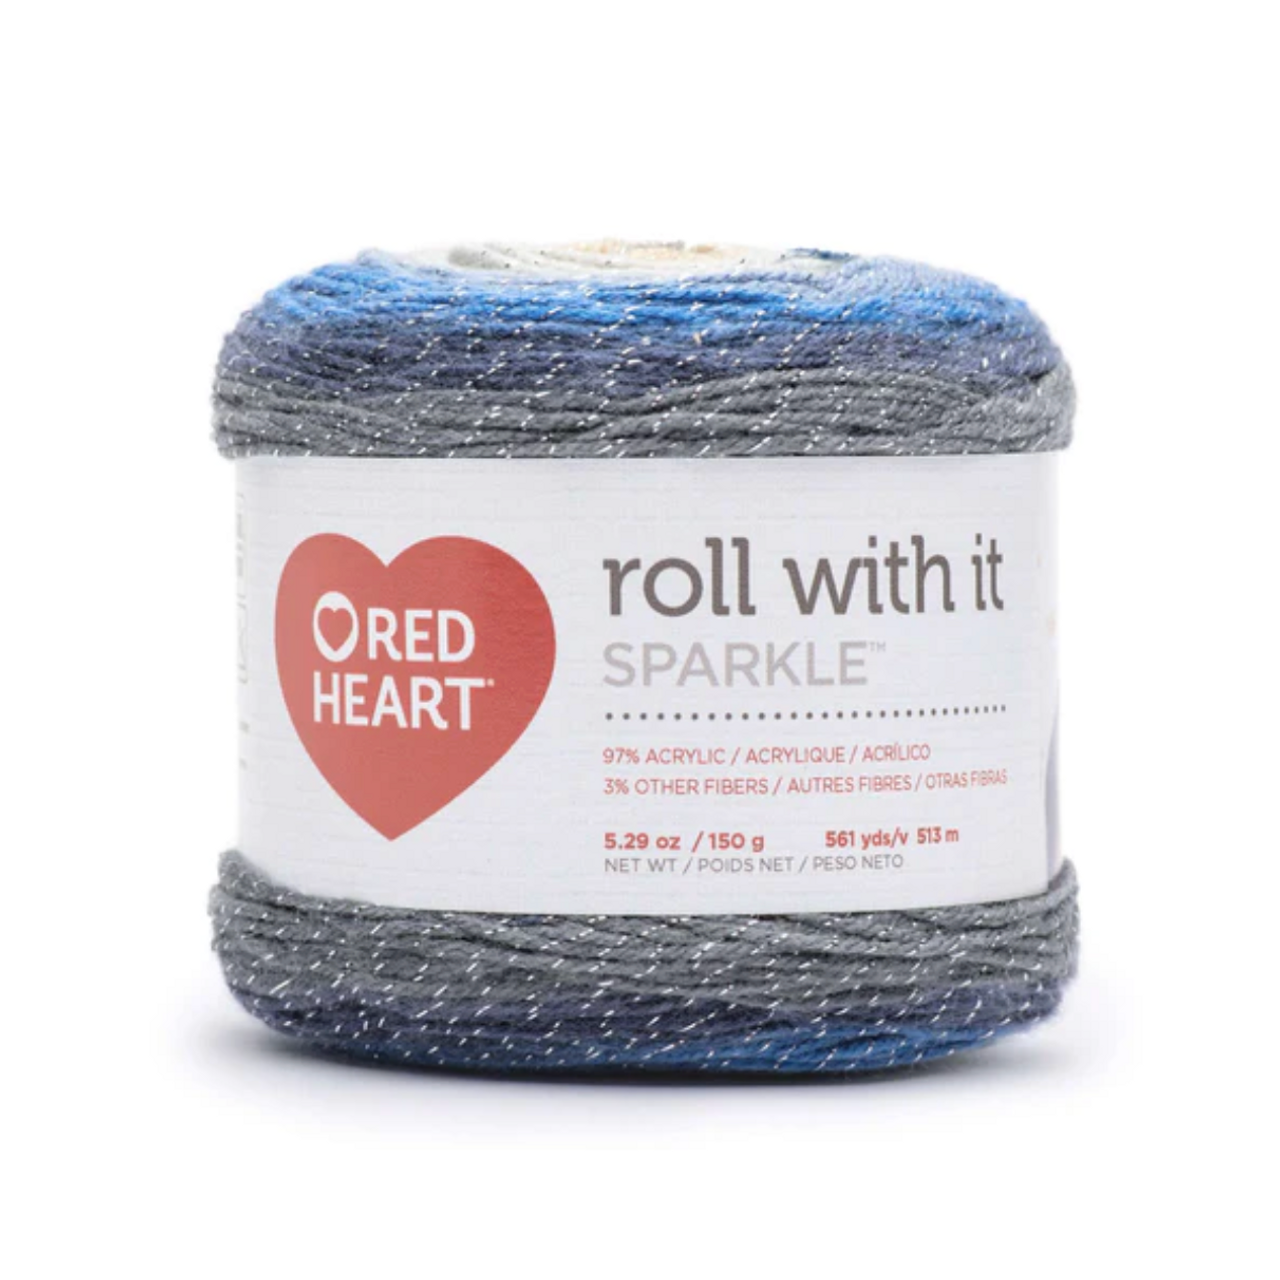 Red Heart Roll With It Sparkle Lake House Knitting & Crochet Yarn